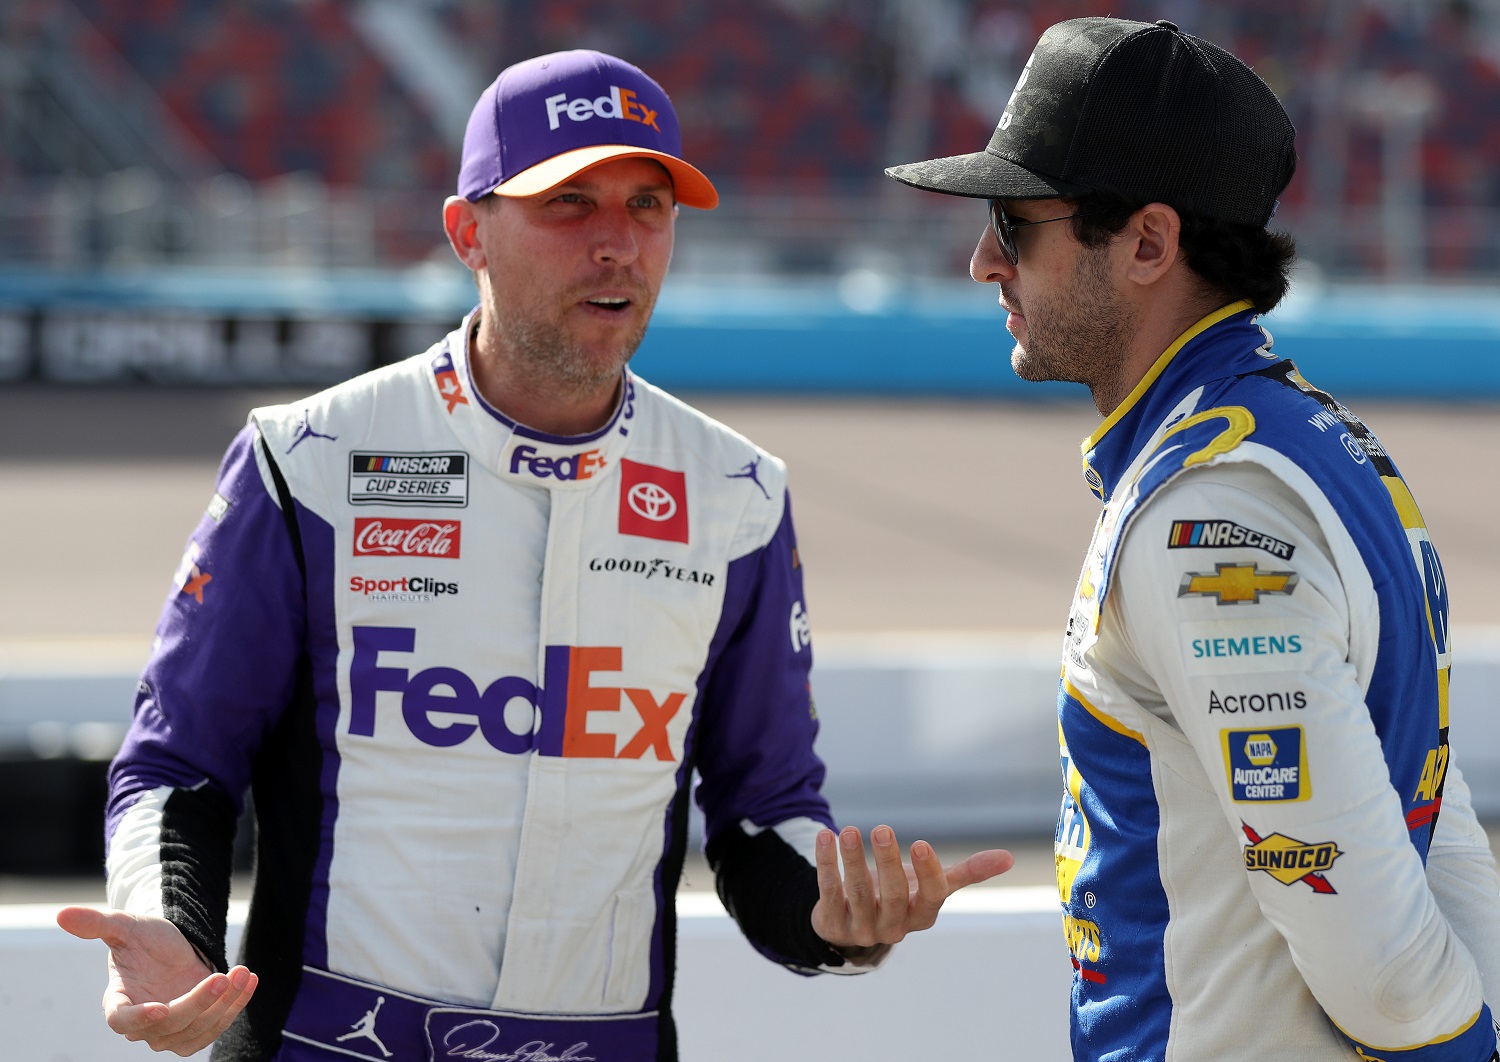 Denny Hamlin, left, talks with Chase Elliott during qualifying for the NASCAR Cup Series Championship at Phoenix Raceway on Nov. 5, 2022.